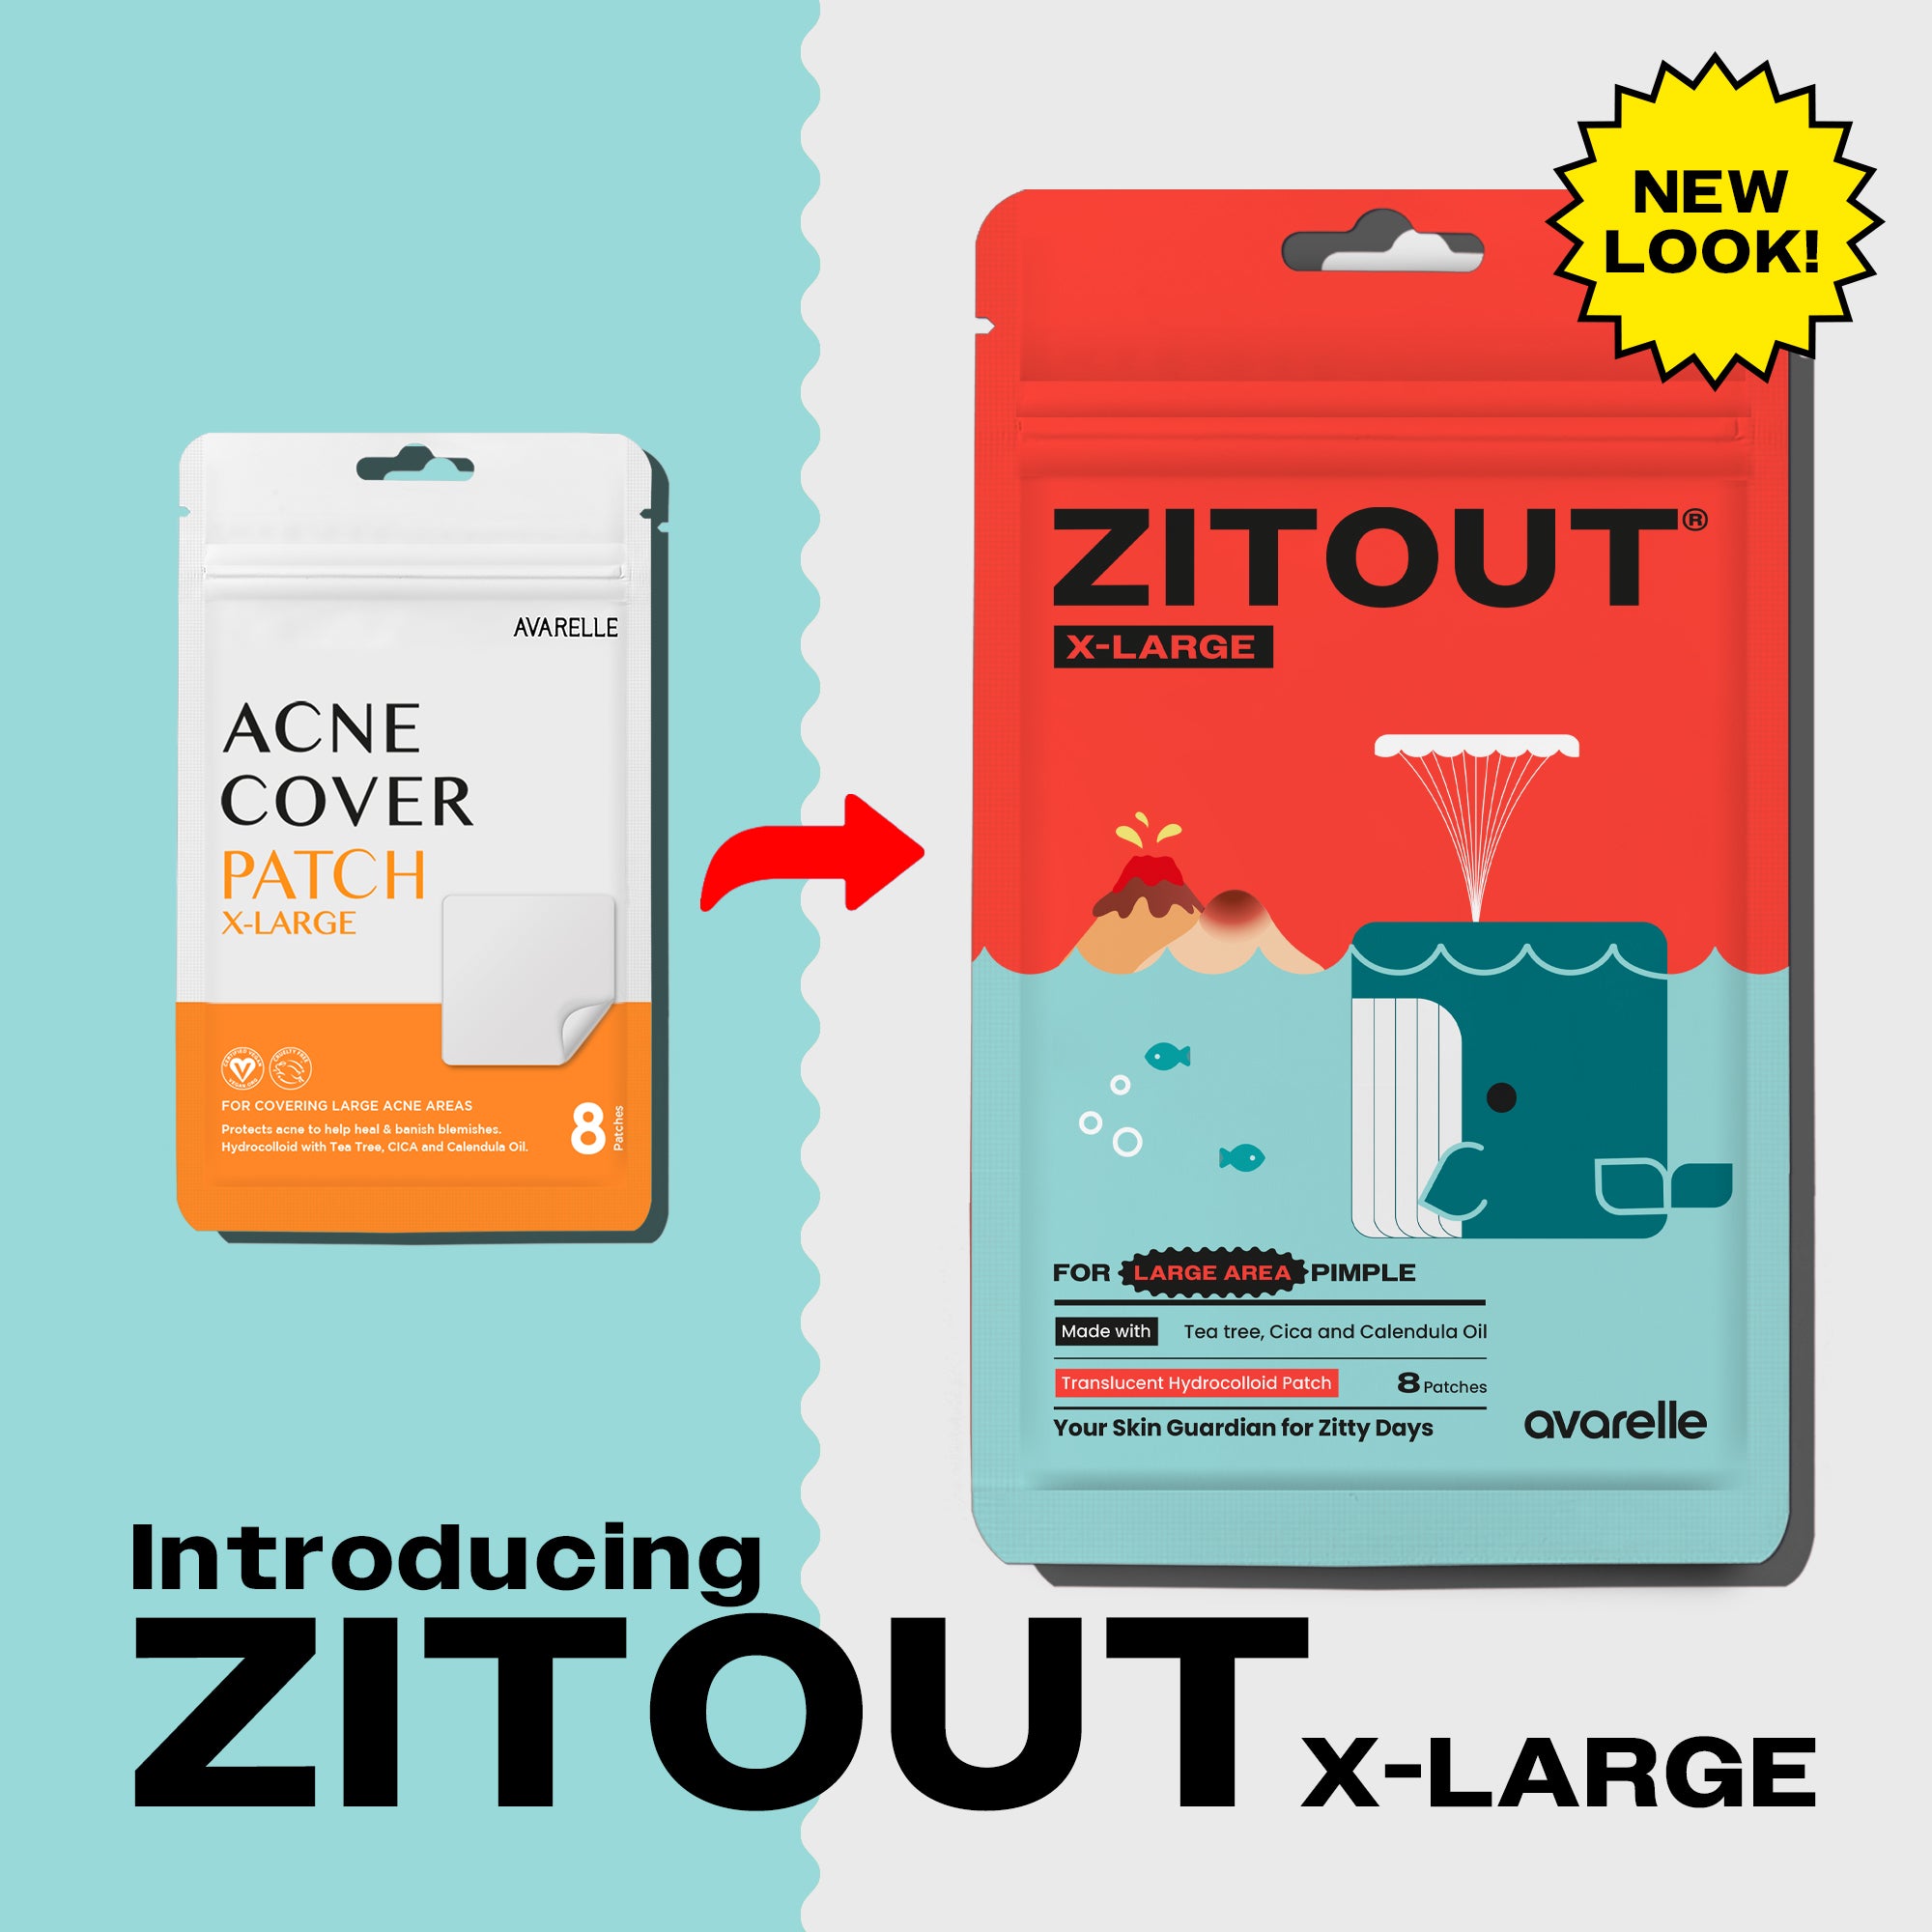 Product rebranding from "acne cover patch" by Avarelle to "ZitOut X-Large Pimple Patch" with a new packaging design.